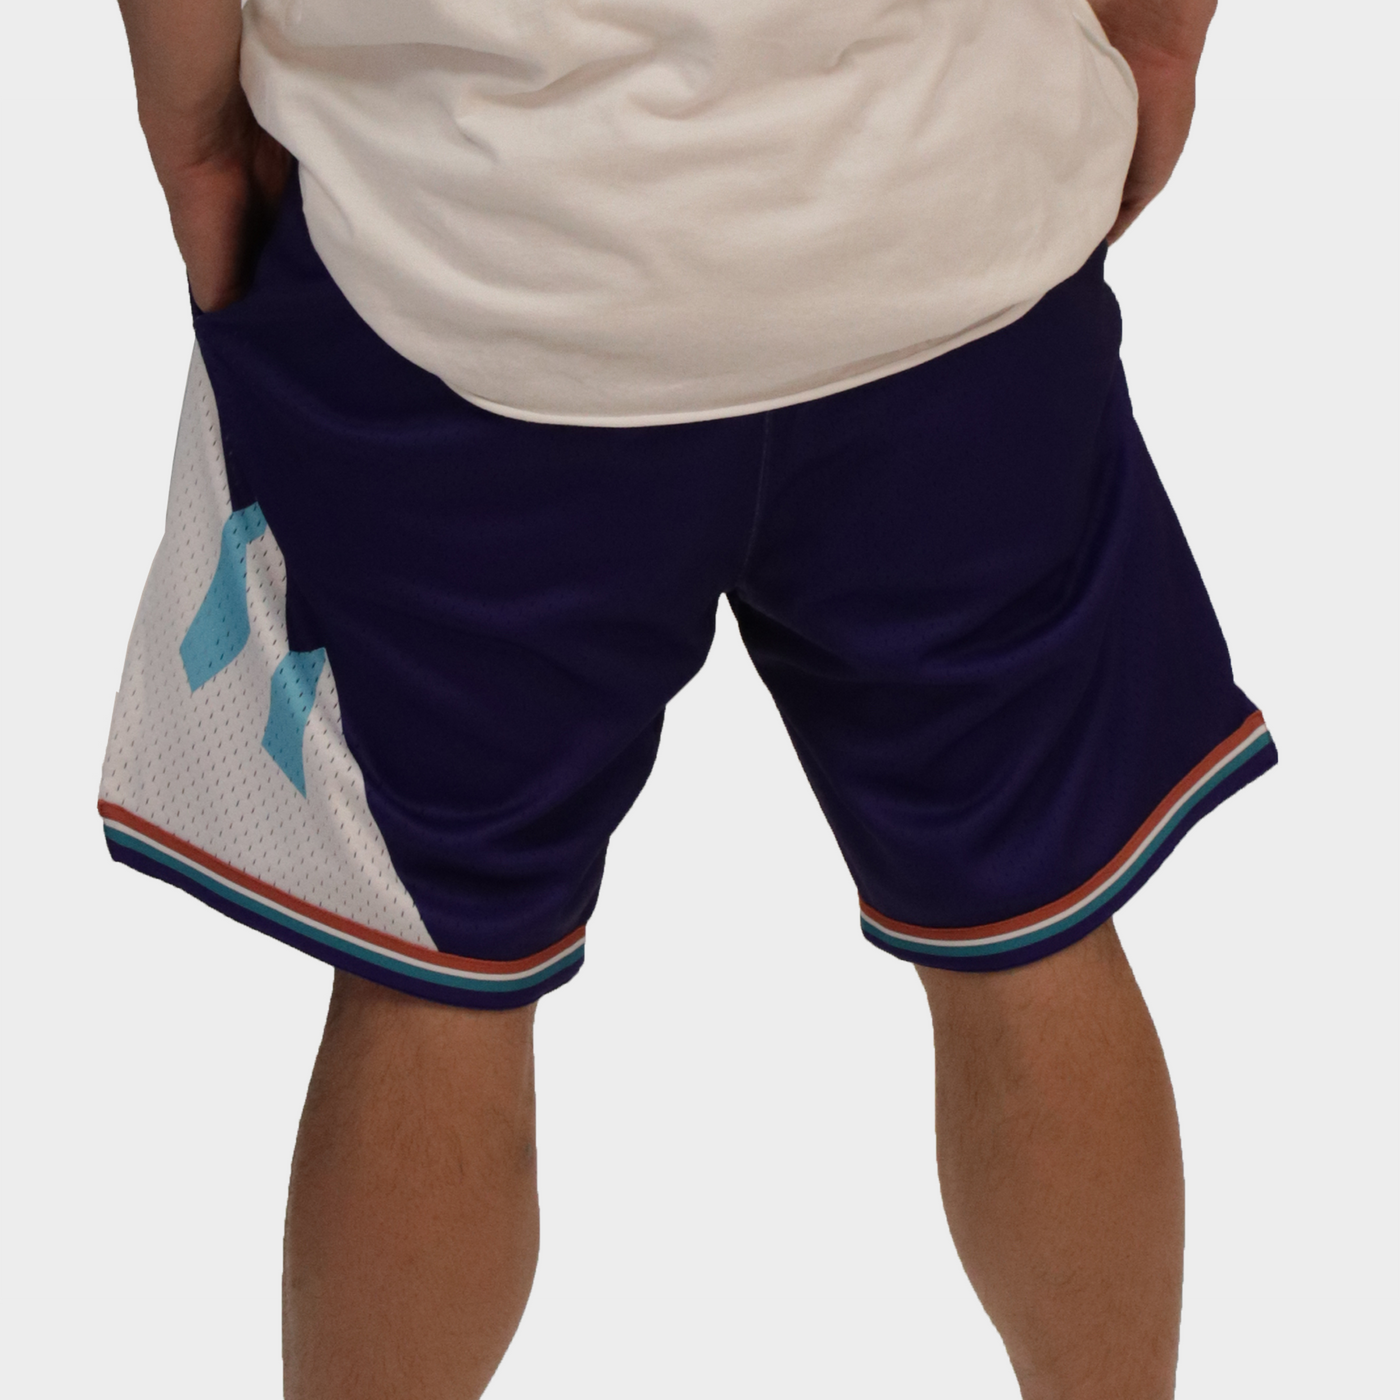 Just Don x Mitchell and Ness NBA Utah Jazz Shorts For Sale at